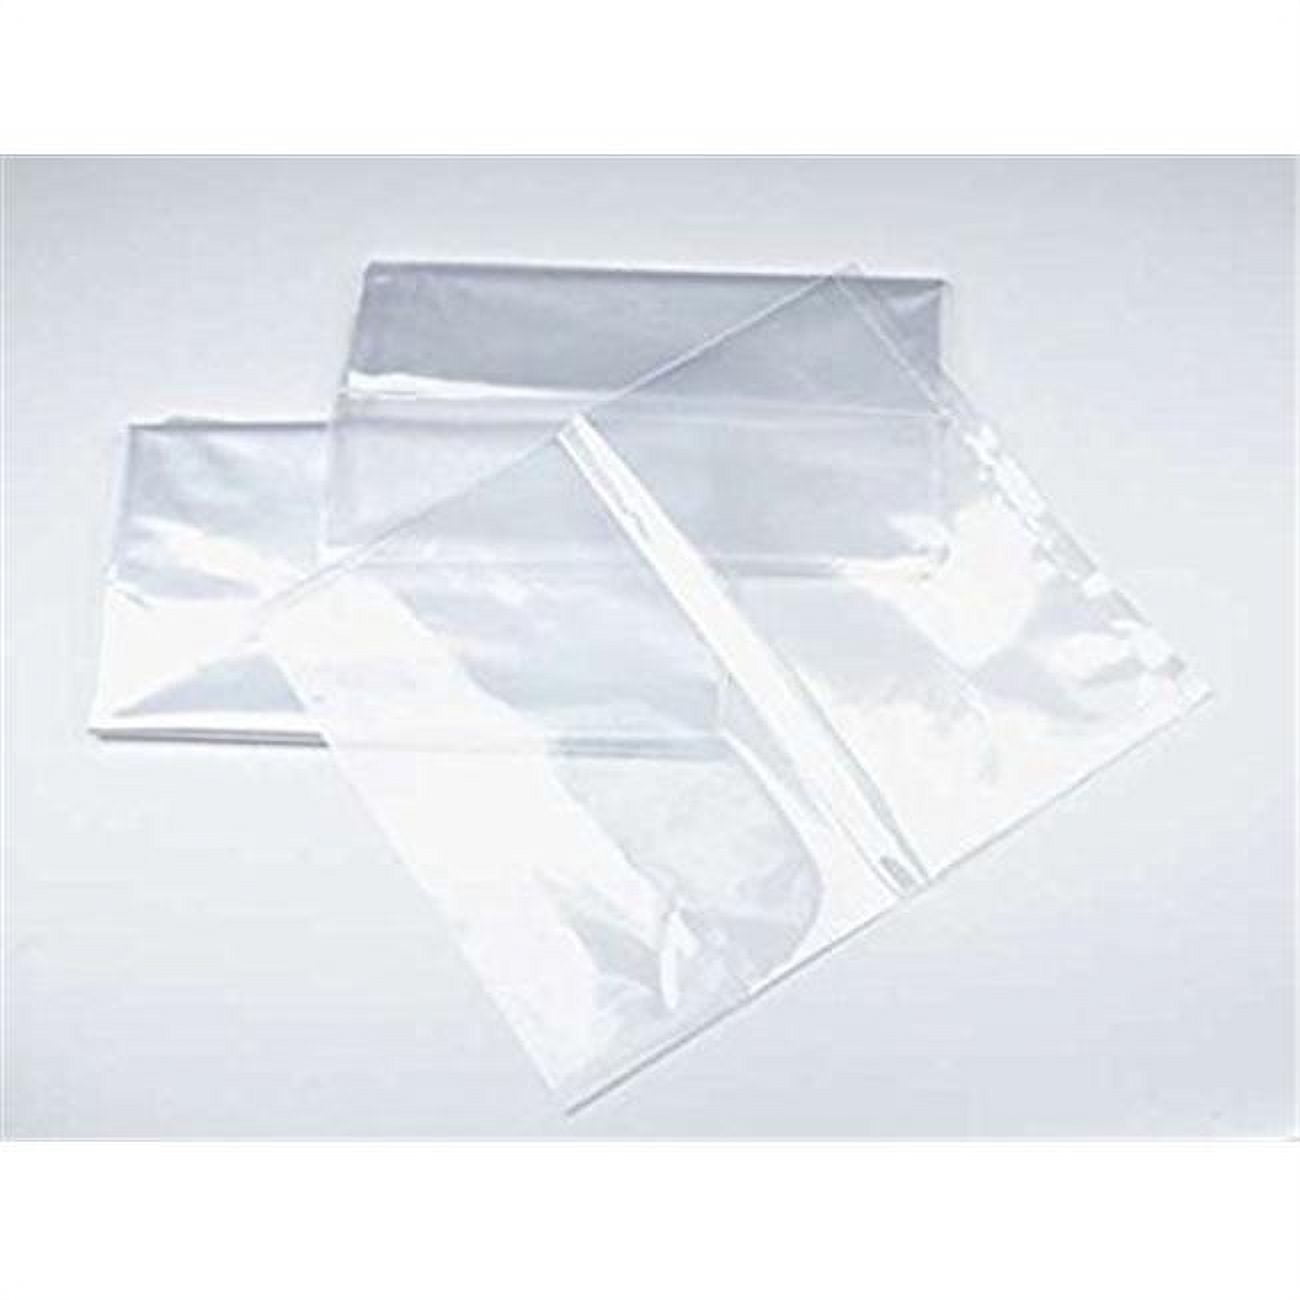 Pb1089 24 X 54 In. 4 Mil Flat Poly Bags, Clear